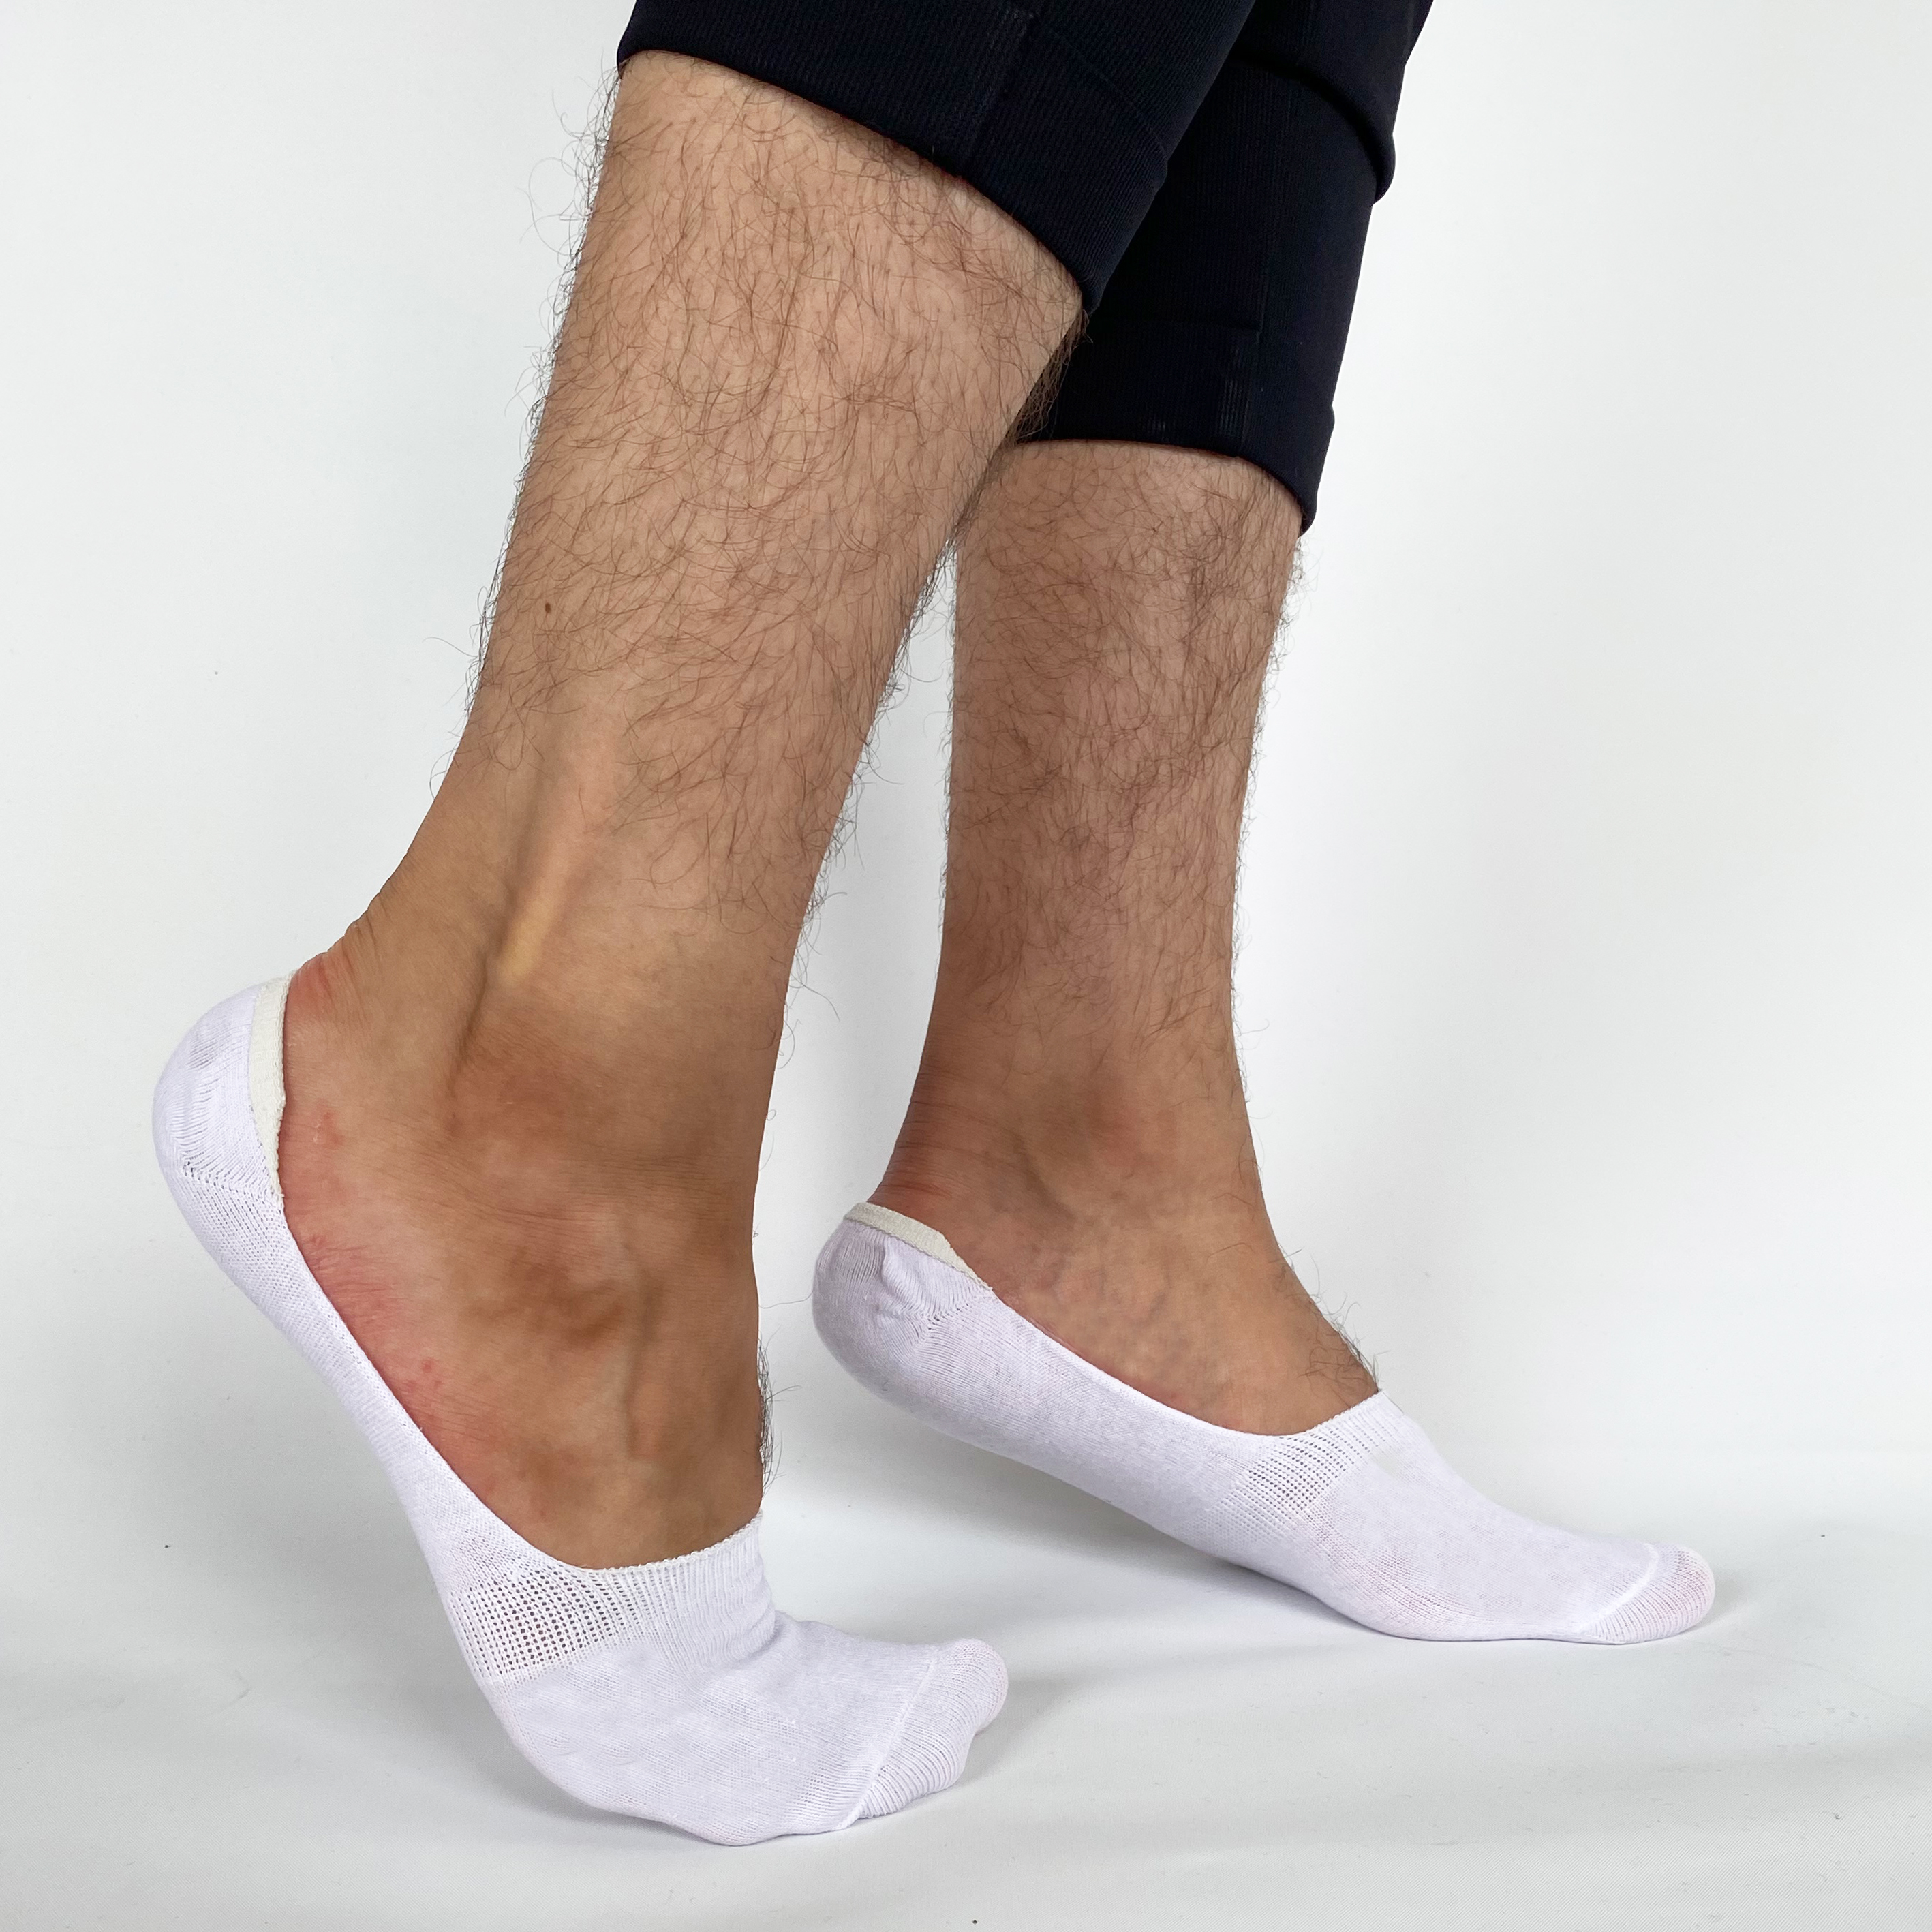 Mens Invisible Trainer Socks 5 Pack Hidden Socks Cotton Rich No Show Size  6-11 | eBay